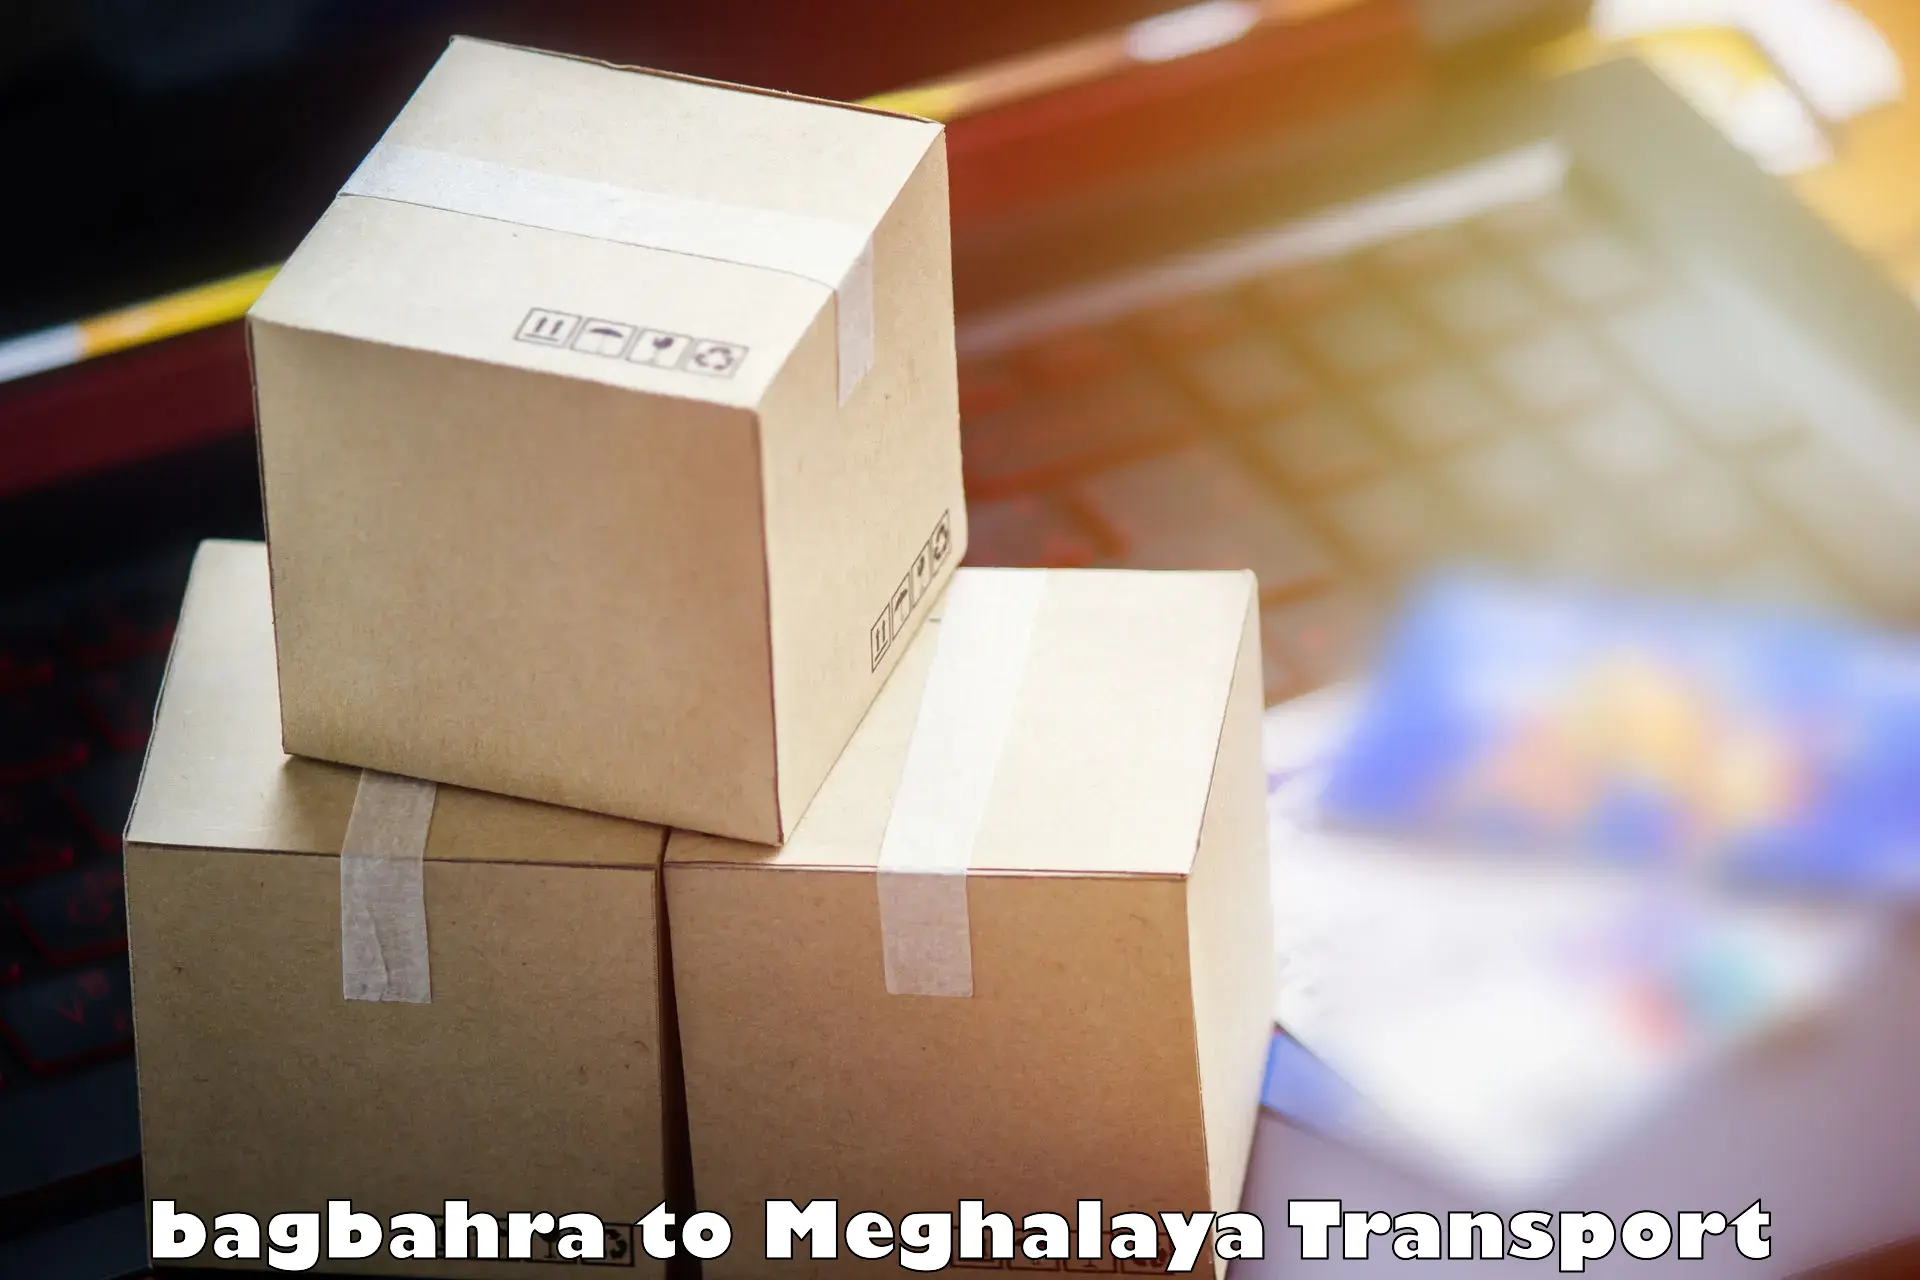 Goods delivery service bagbahra to Dkhiah West